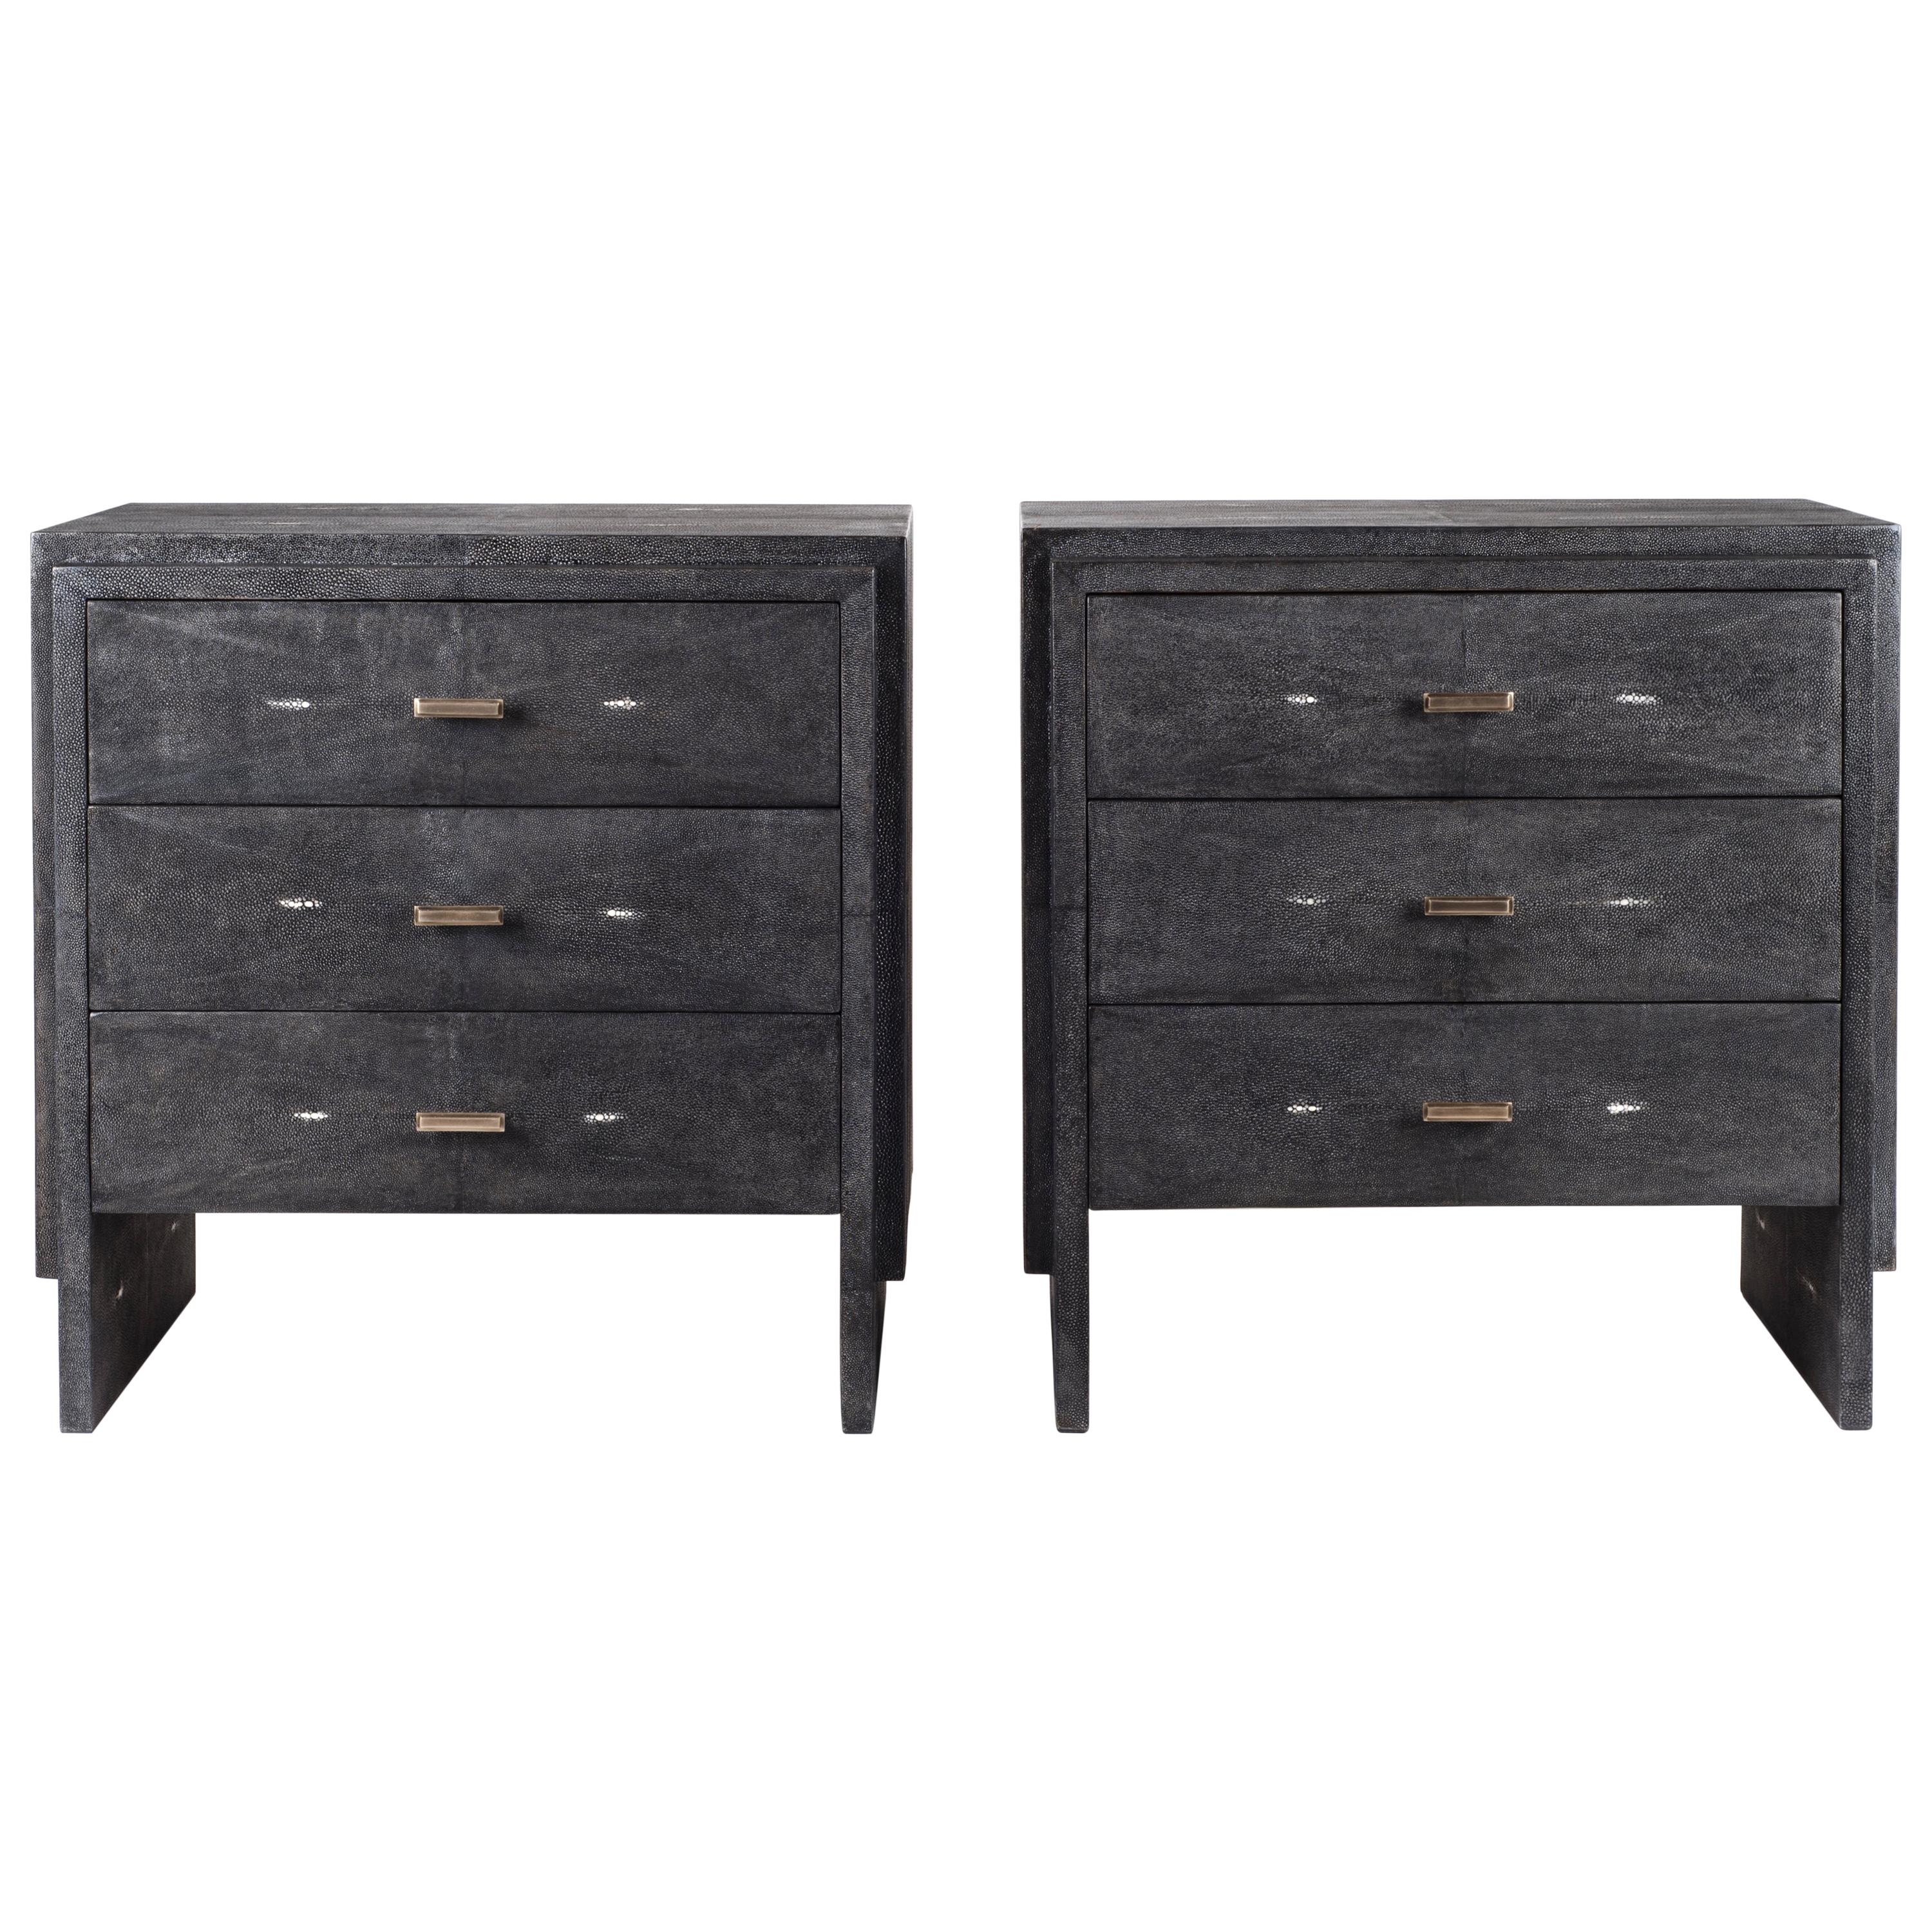 Set of Two Shagreen Nightstands with Beveled Drawers by R&Y Augousti